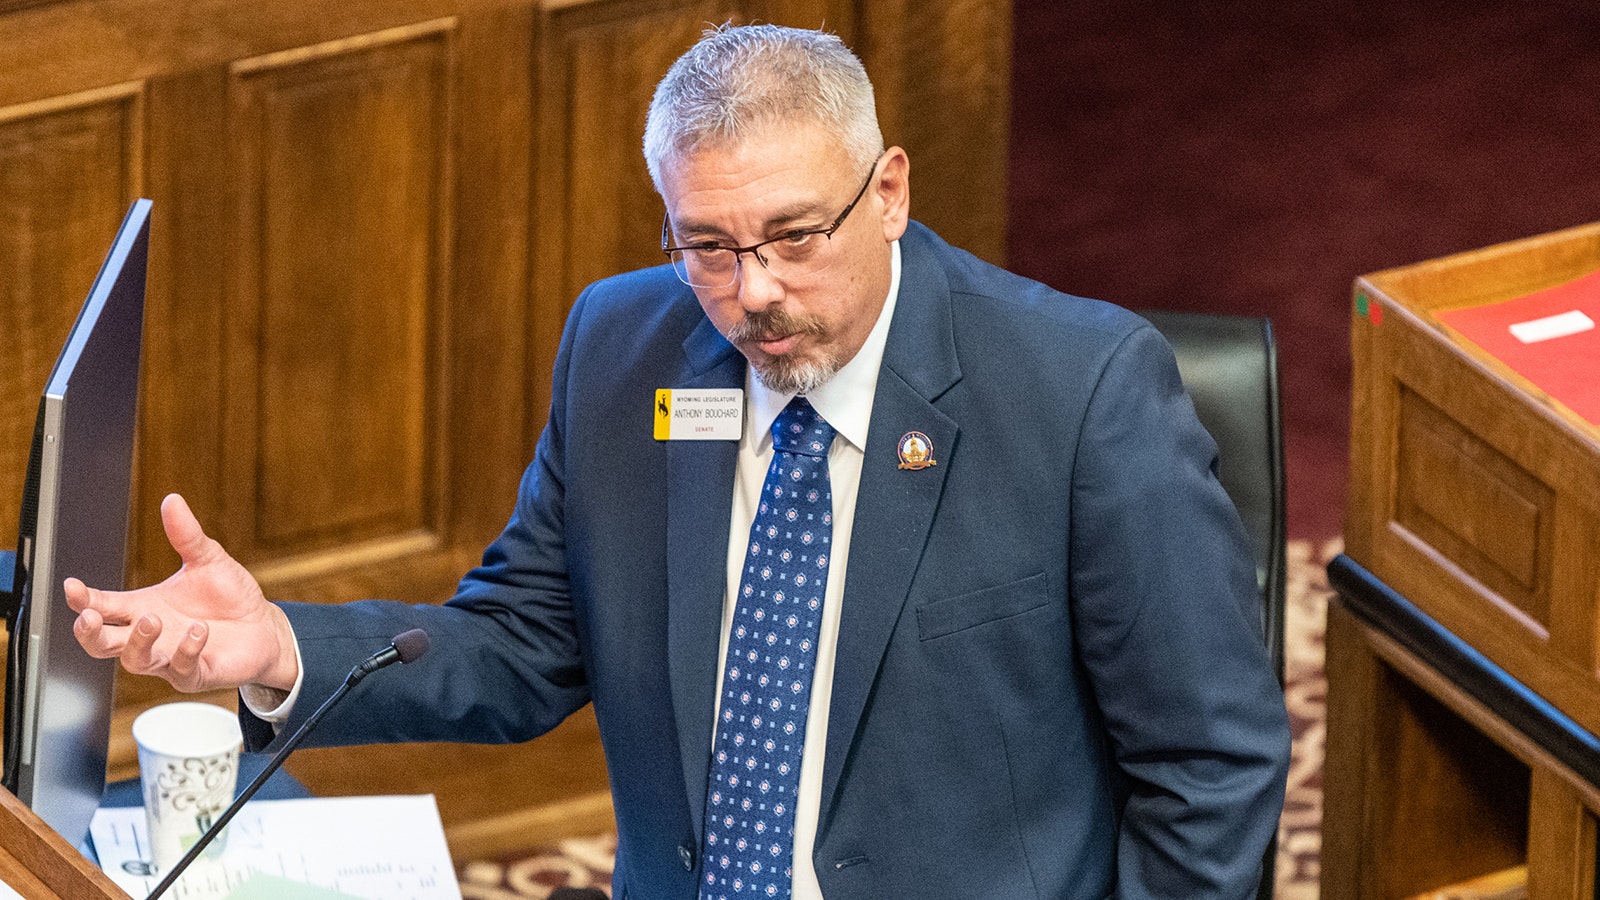 State Sen. Anthony Bouchard, R-Cheyenne, is politically opposite from Rep. Karlee Provenza, D-Laramie, but he's publicly supporting her free speech rights in the wake of a controversial social media post she shared.